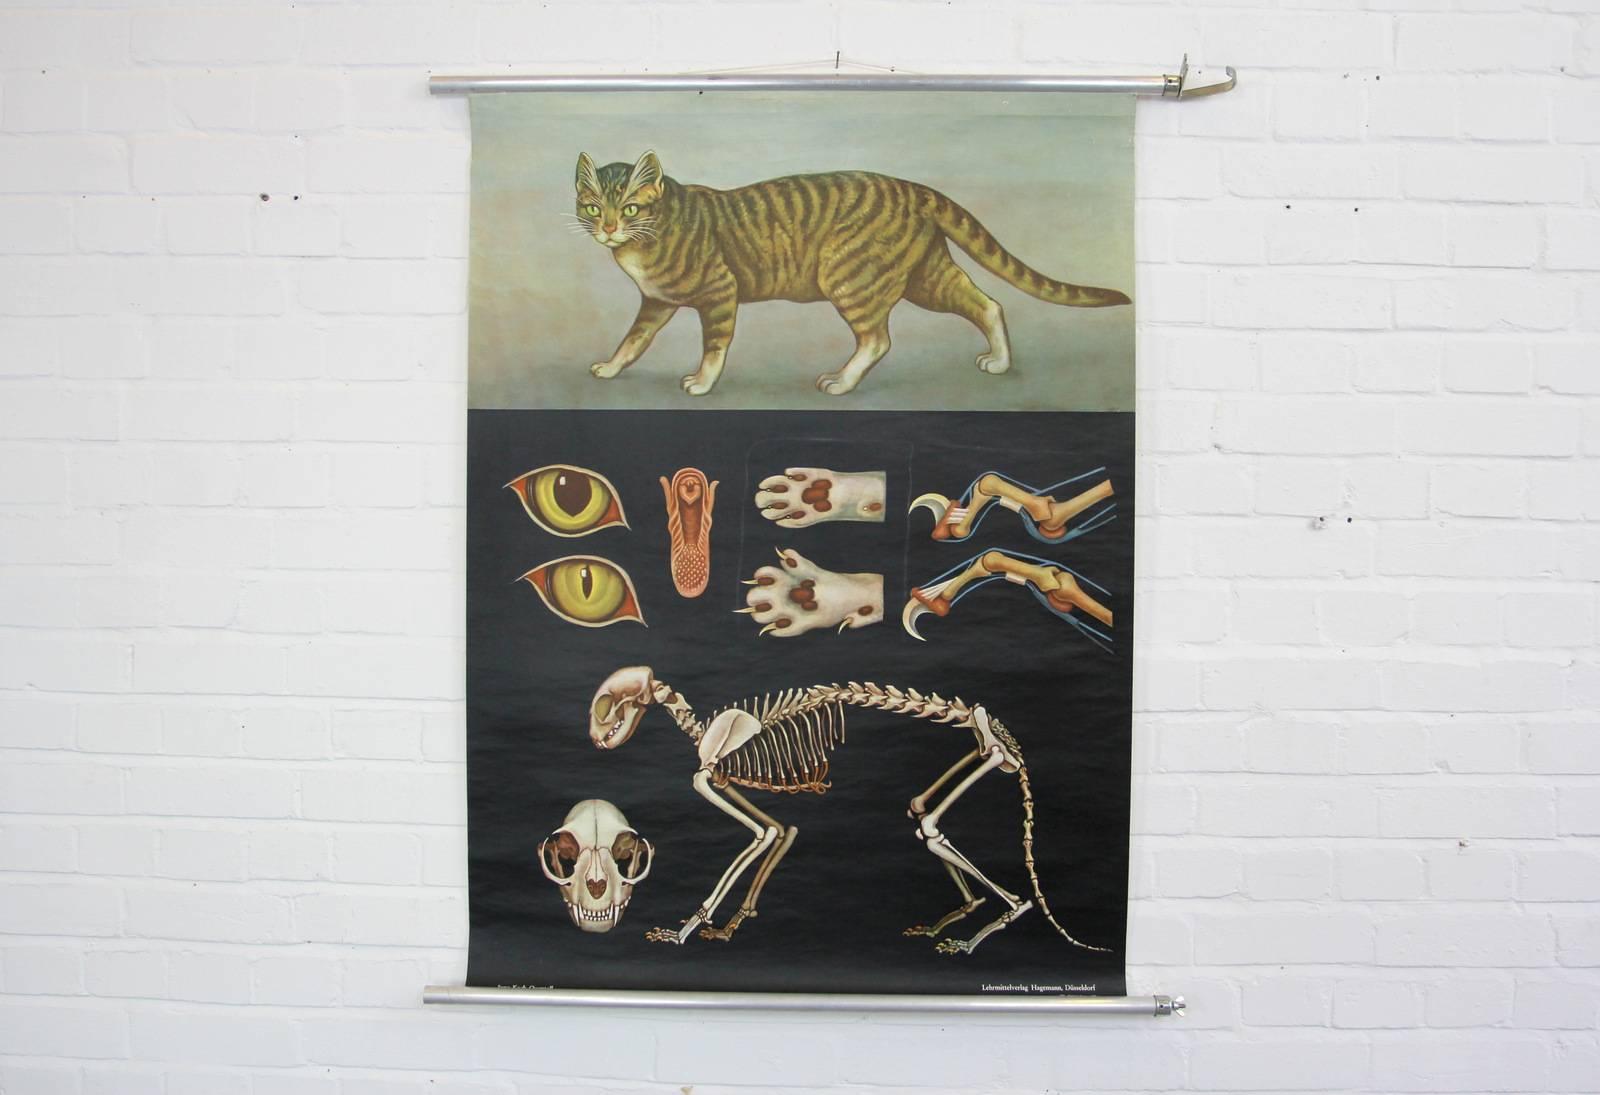 Wall chart of the cat by Jung Koch Quentell

- Canvas backed
- On it's original metal hangers
- German, circa 1960s
- Measures: 97cm x 116cm

Jung Koch Quentell

The name Jung Koch Quentell came to be as they were the last names of the